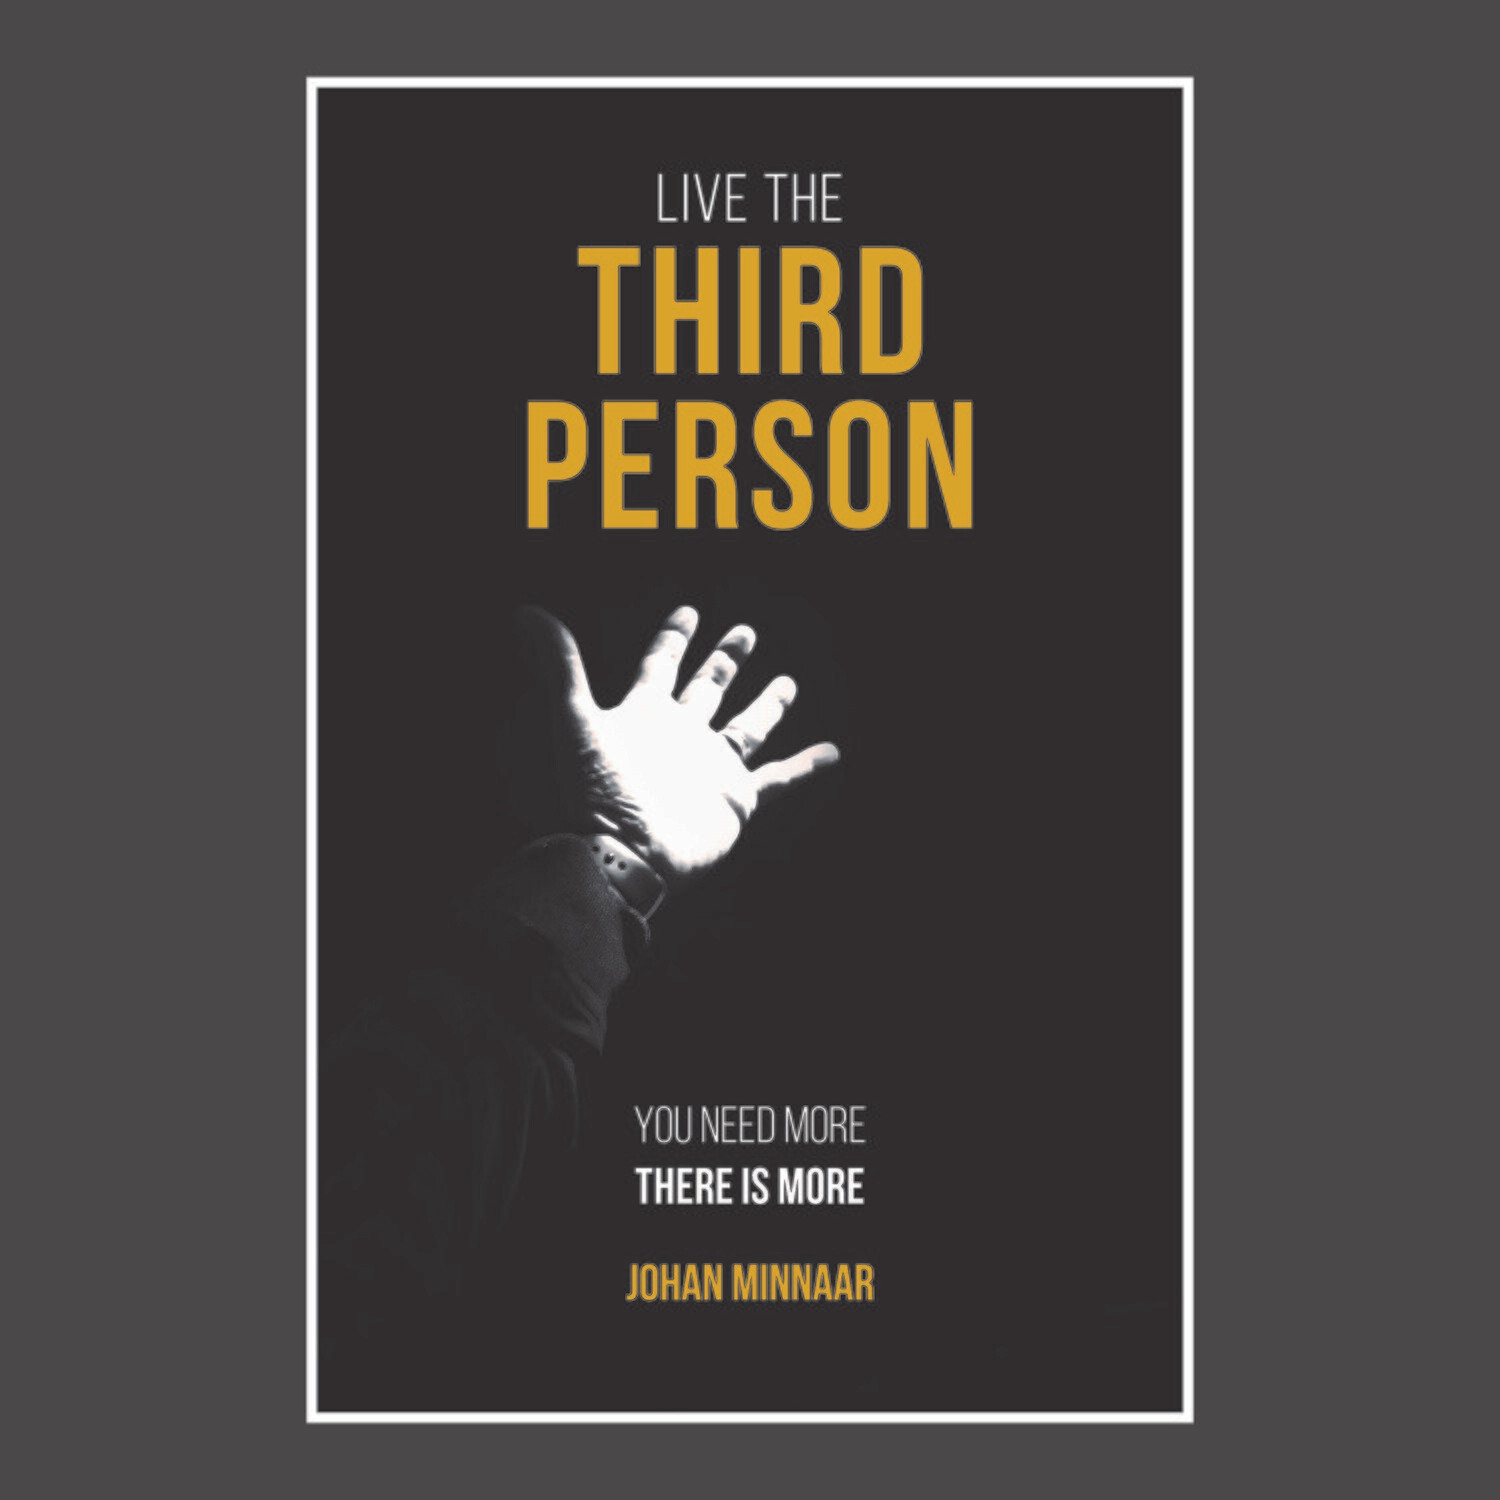 Live the THIRD person (2nd edition print)